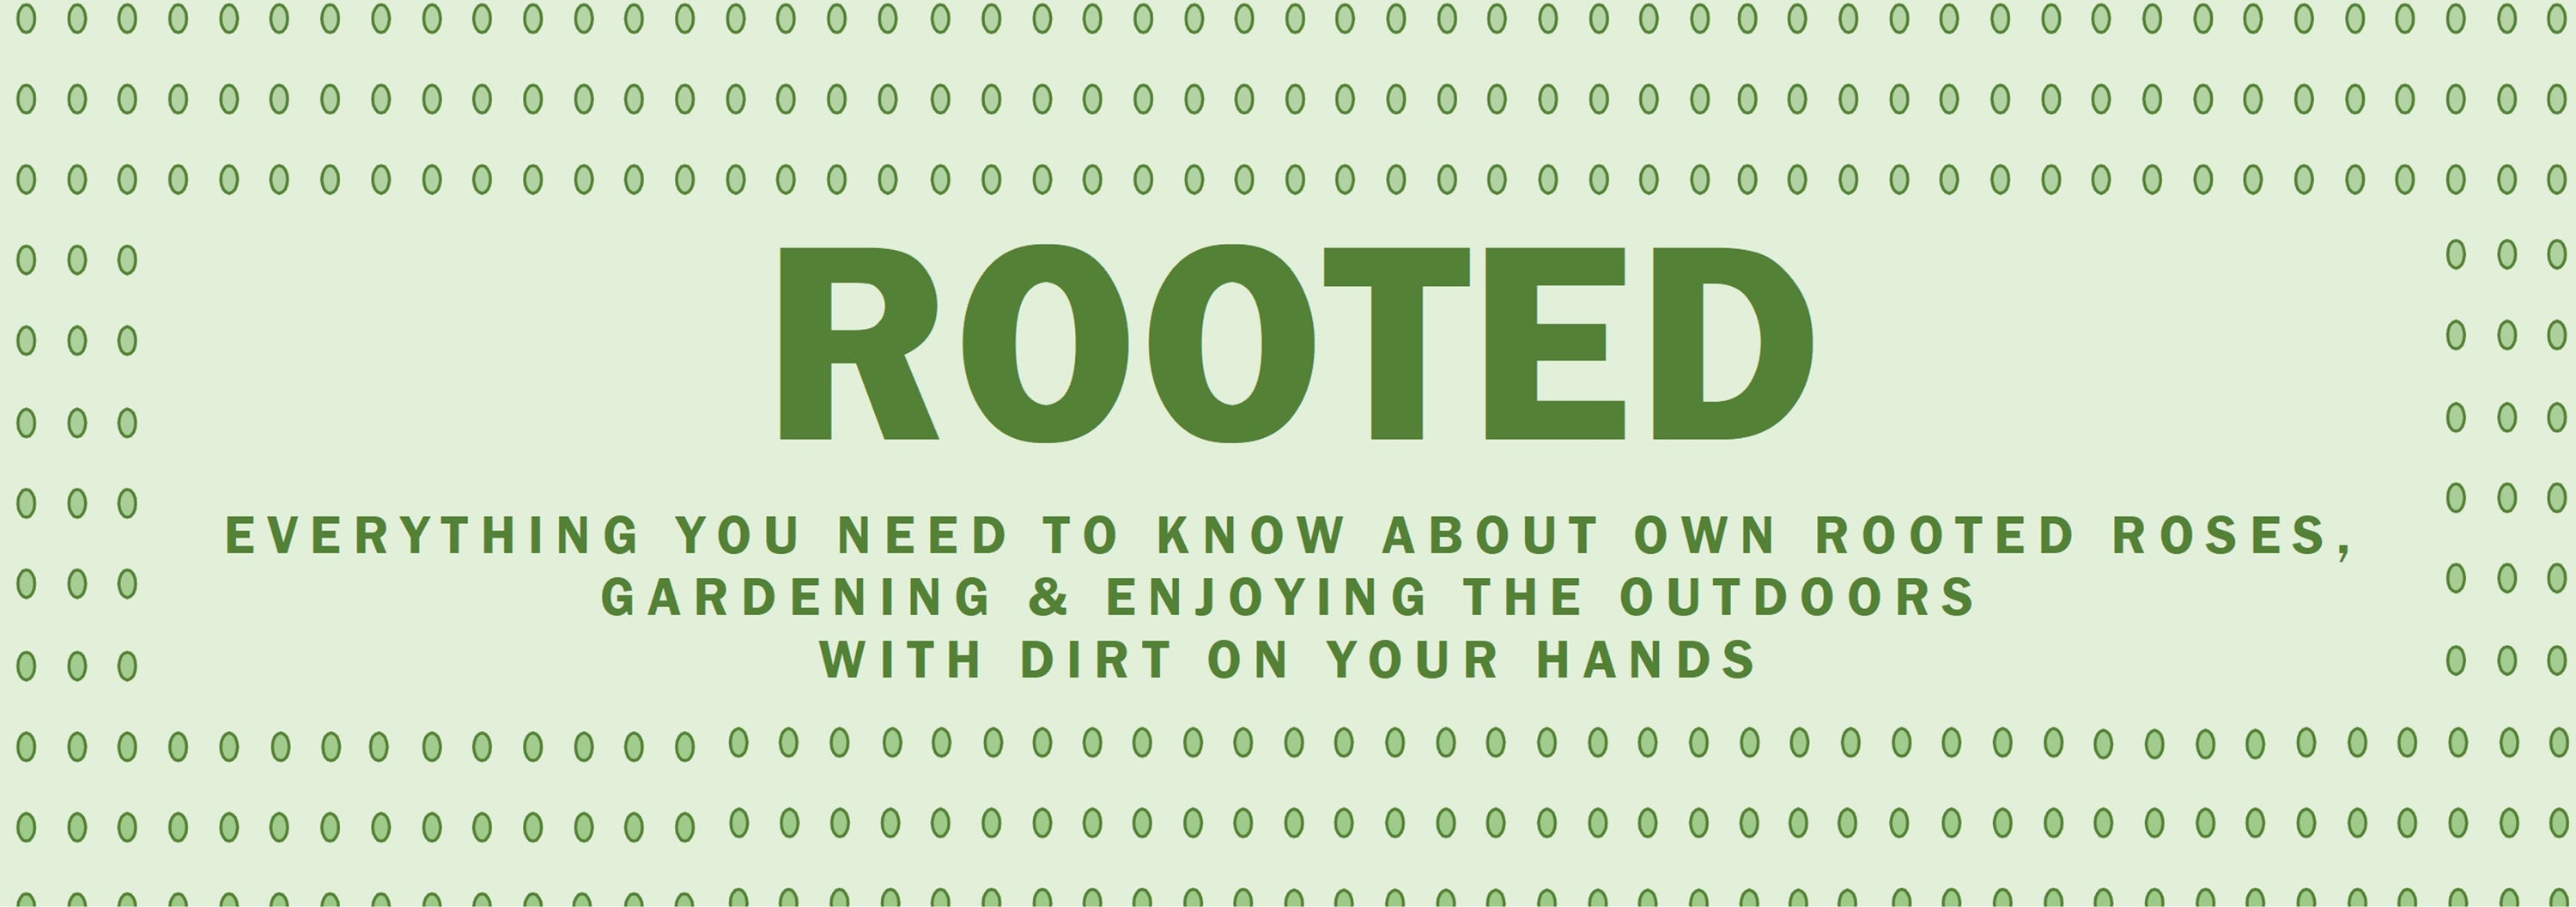 Rooted!!   Edition 1 of the Eureka Plants newsletter!